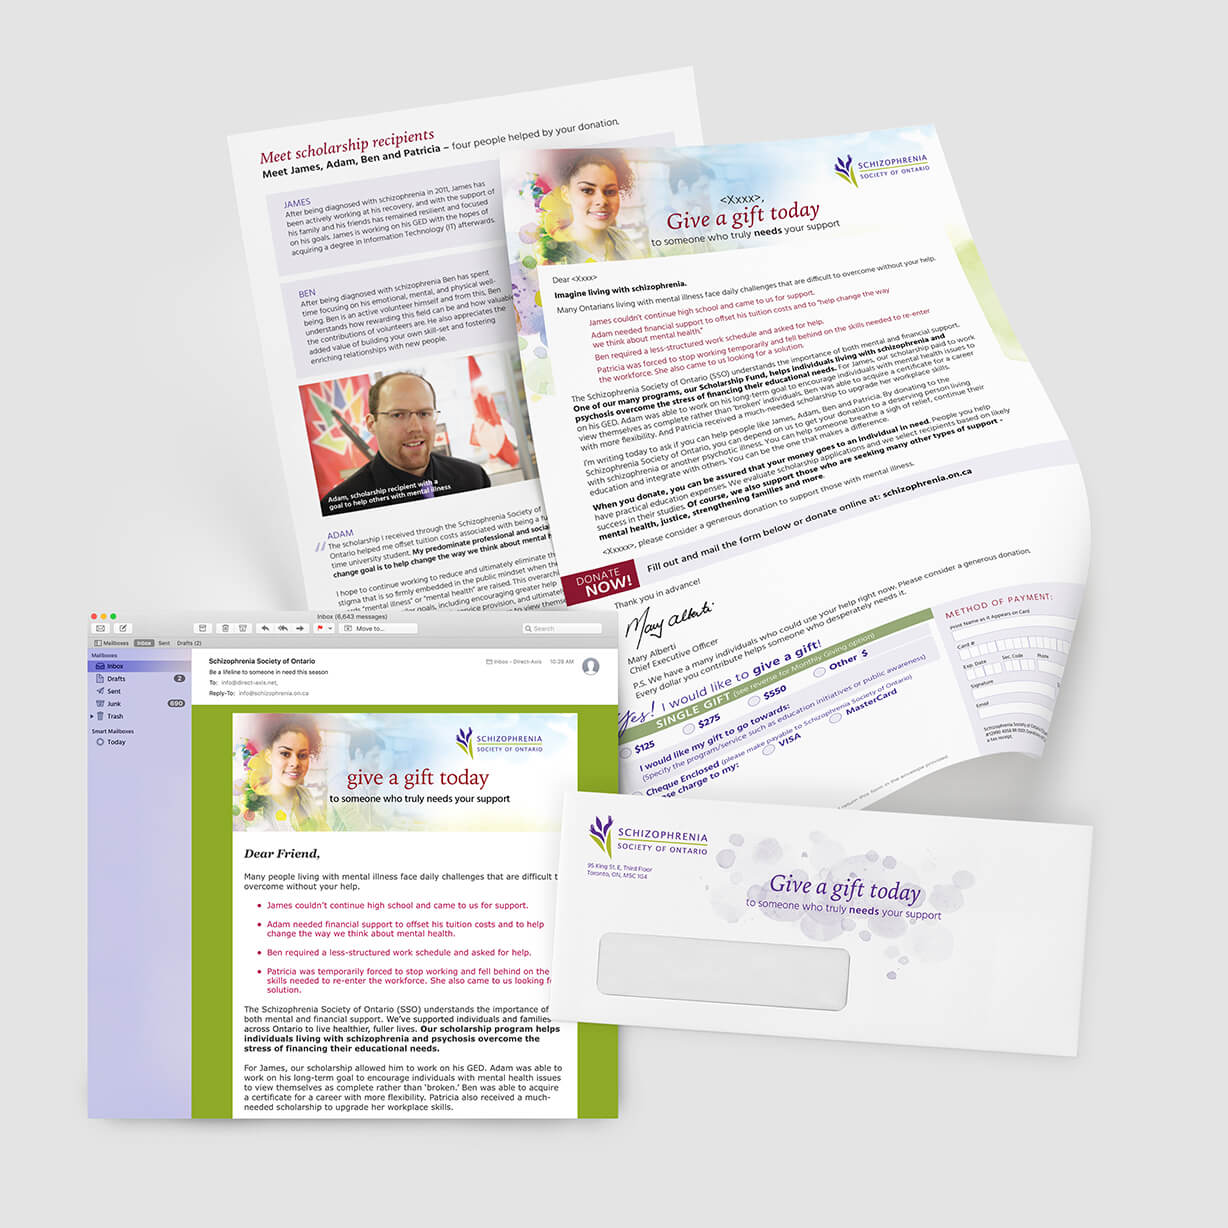 Direct Mail & Email combine for a donor campaign